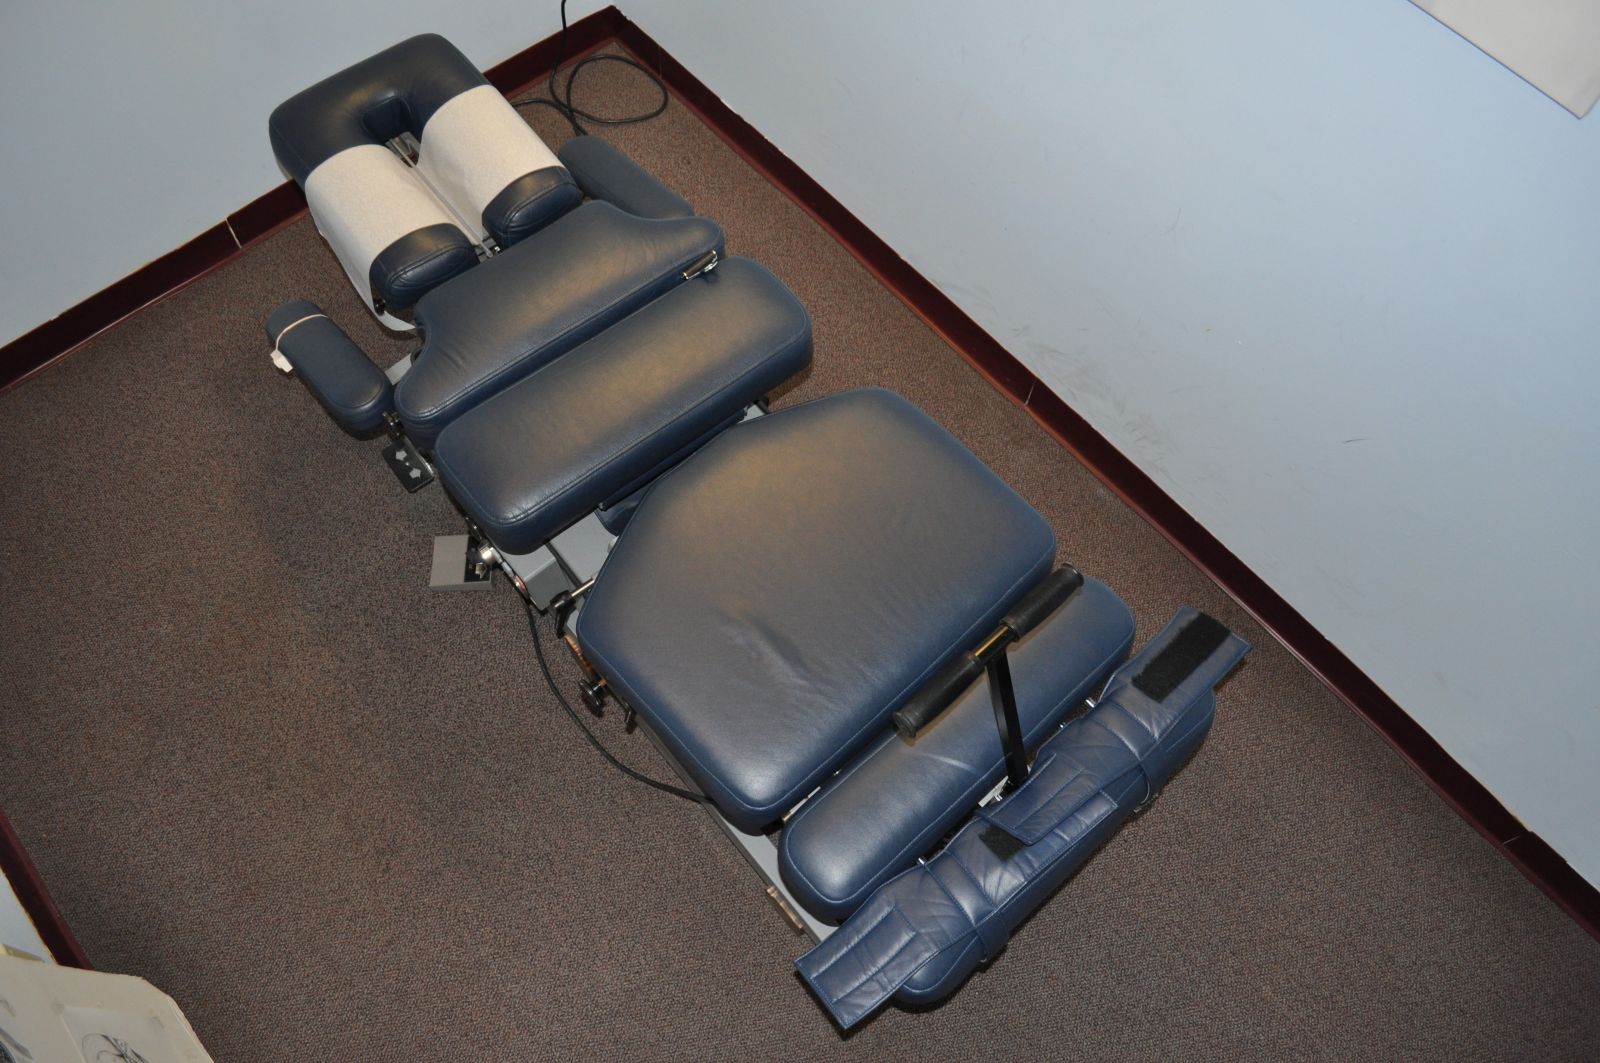 spinal decompression bed